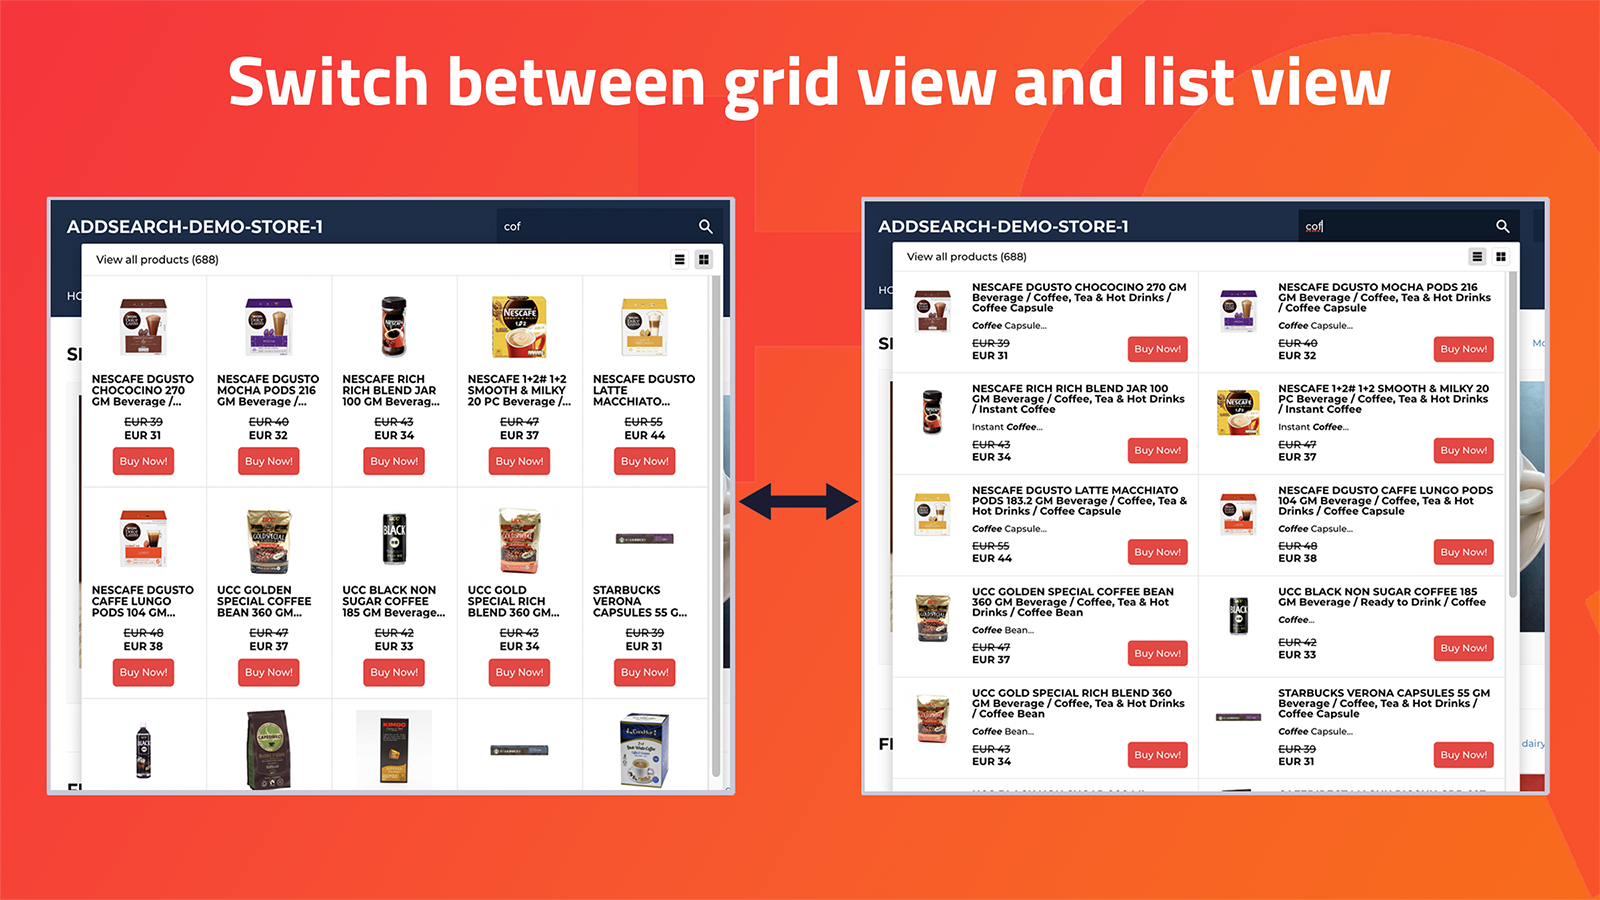 Switch between grid view and list view